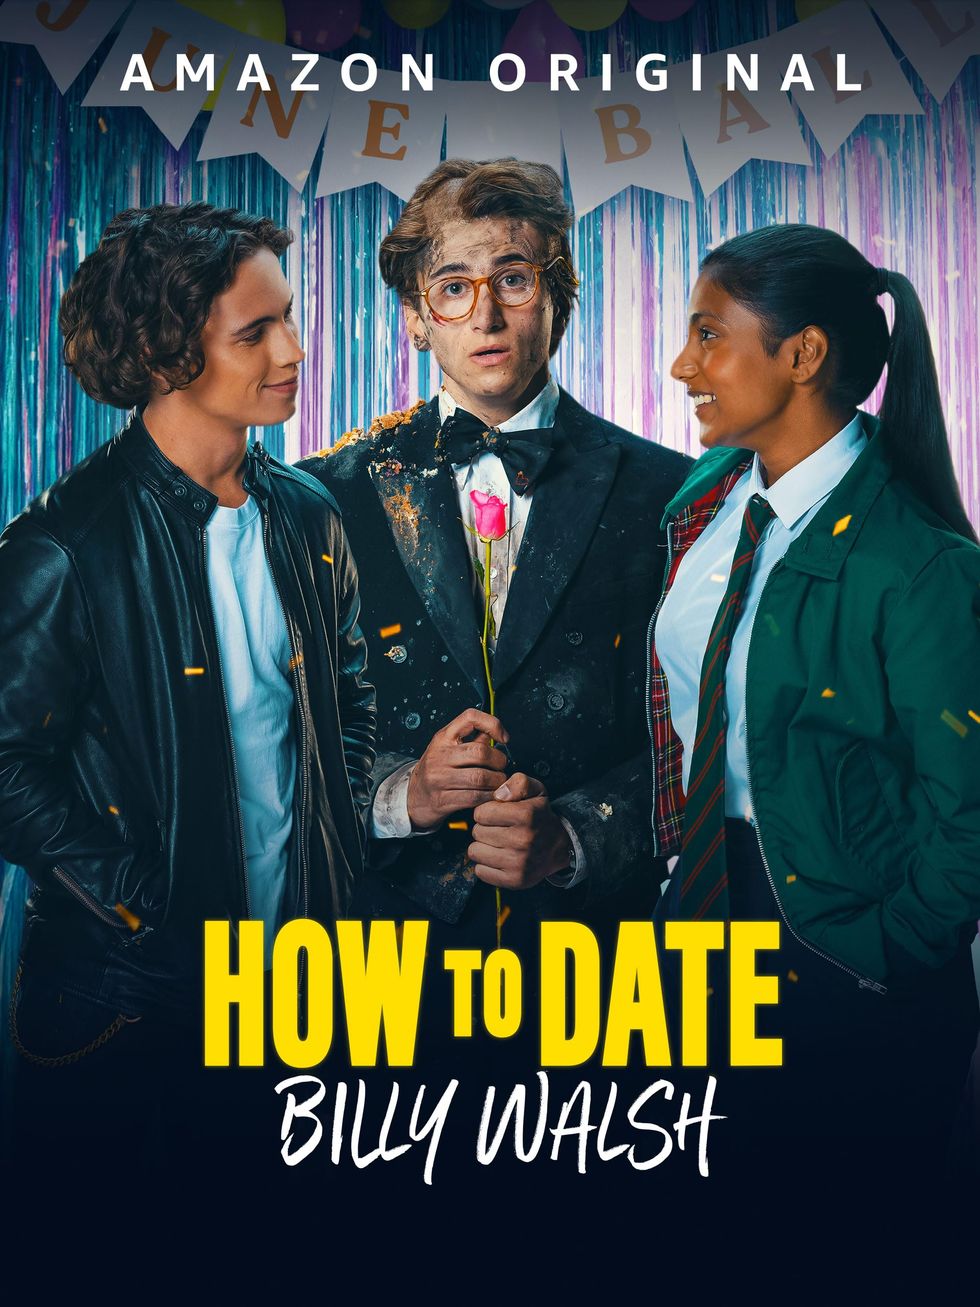 Watch How to Date Billy Walsh on Prime Video